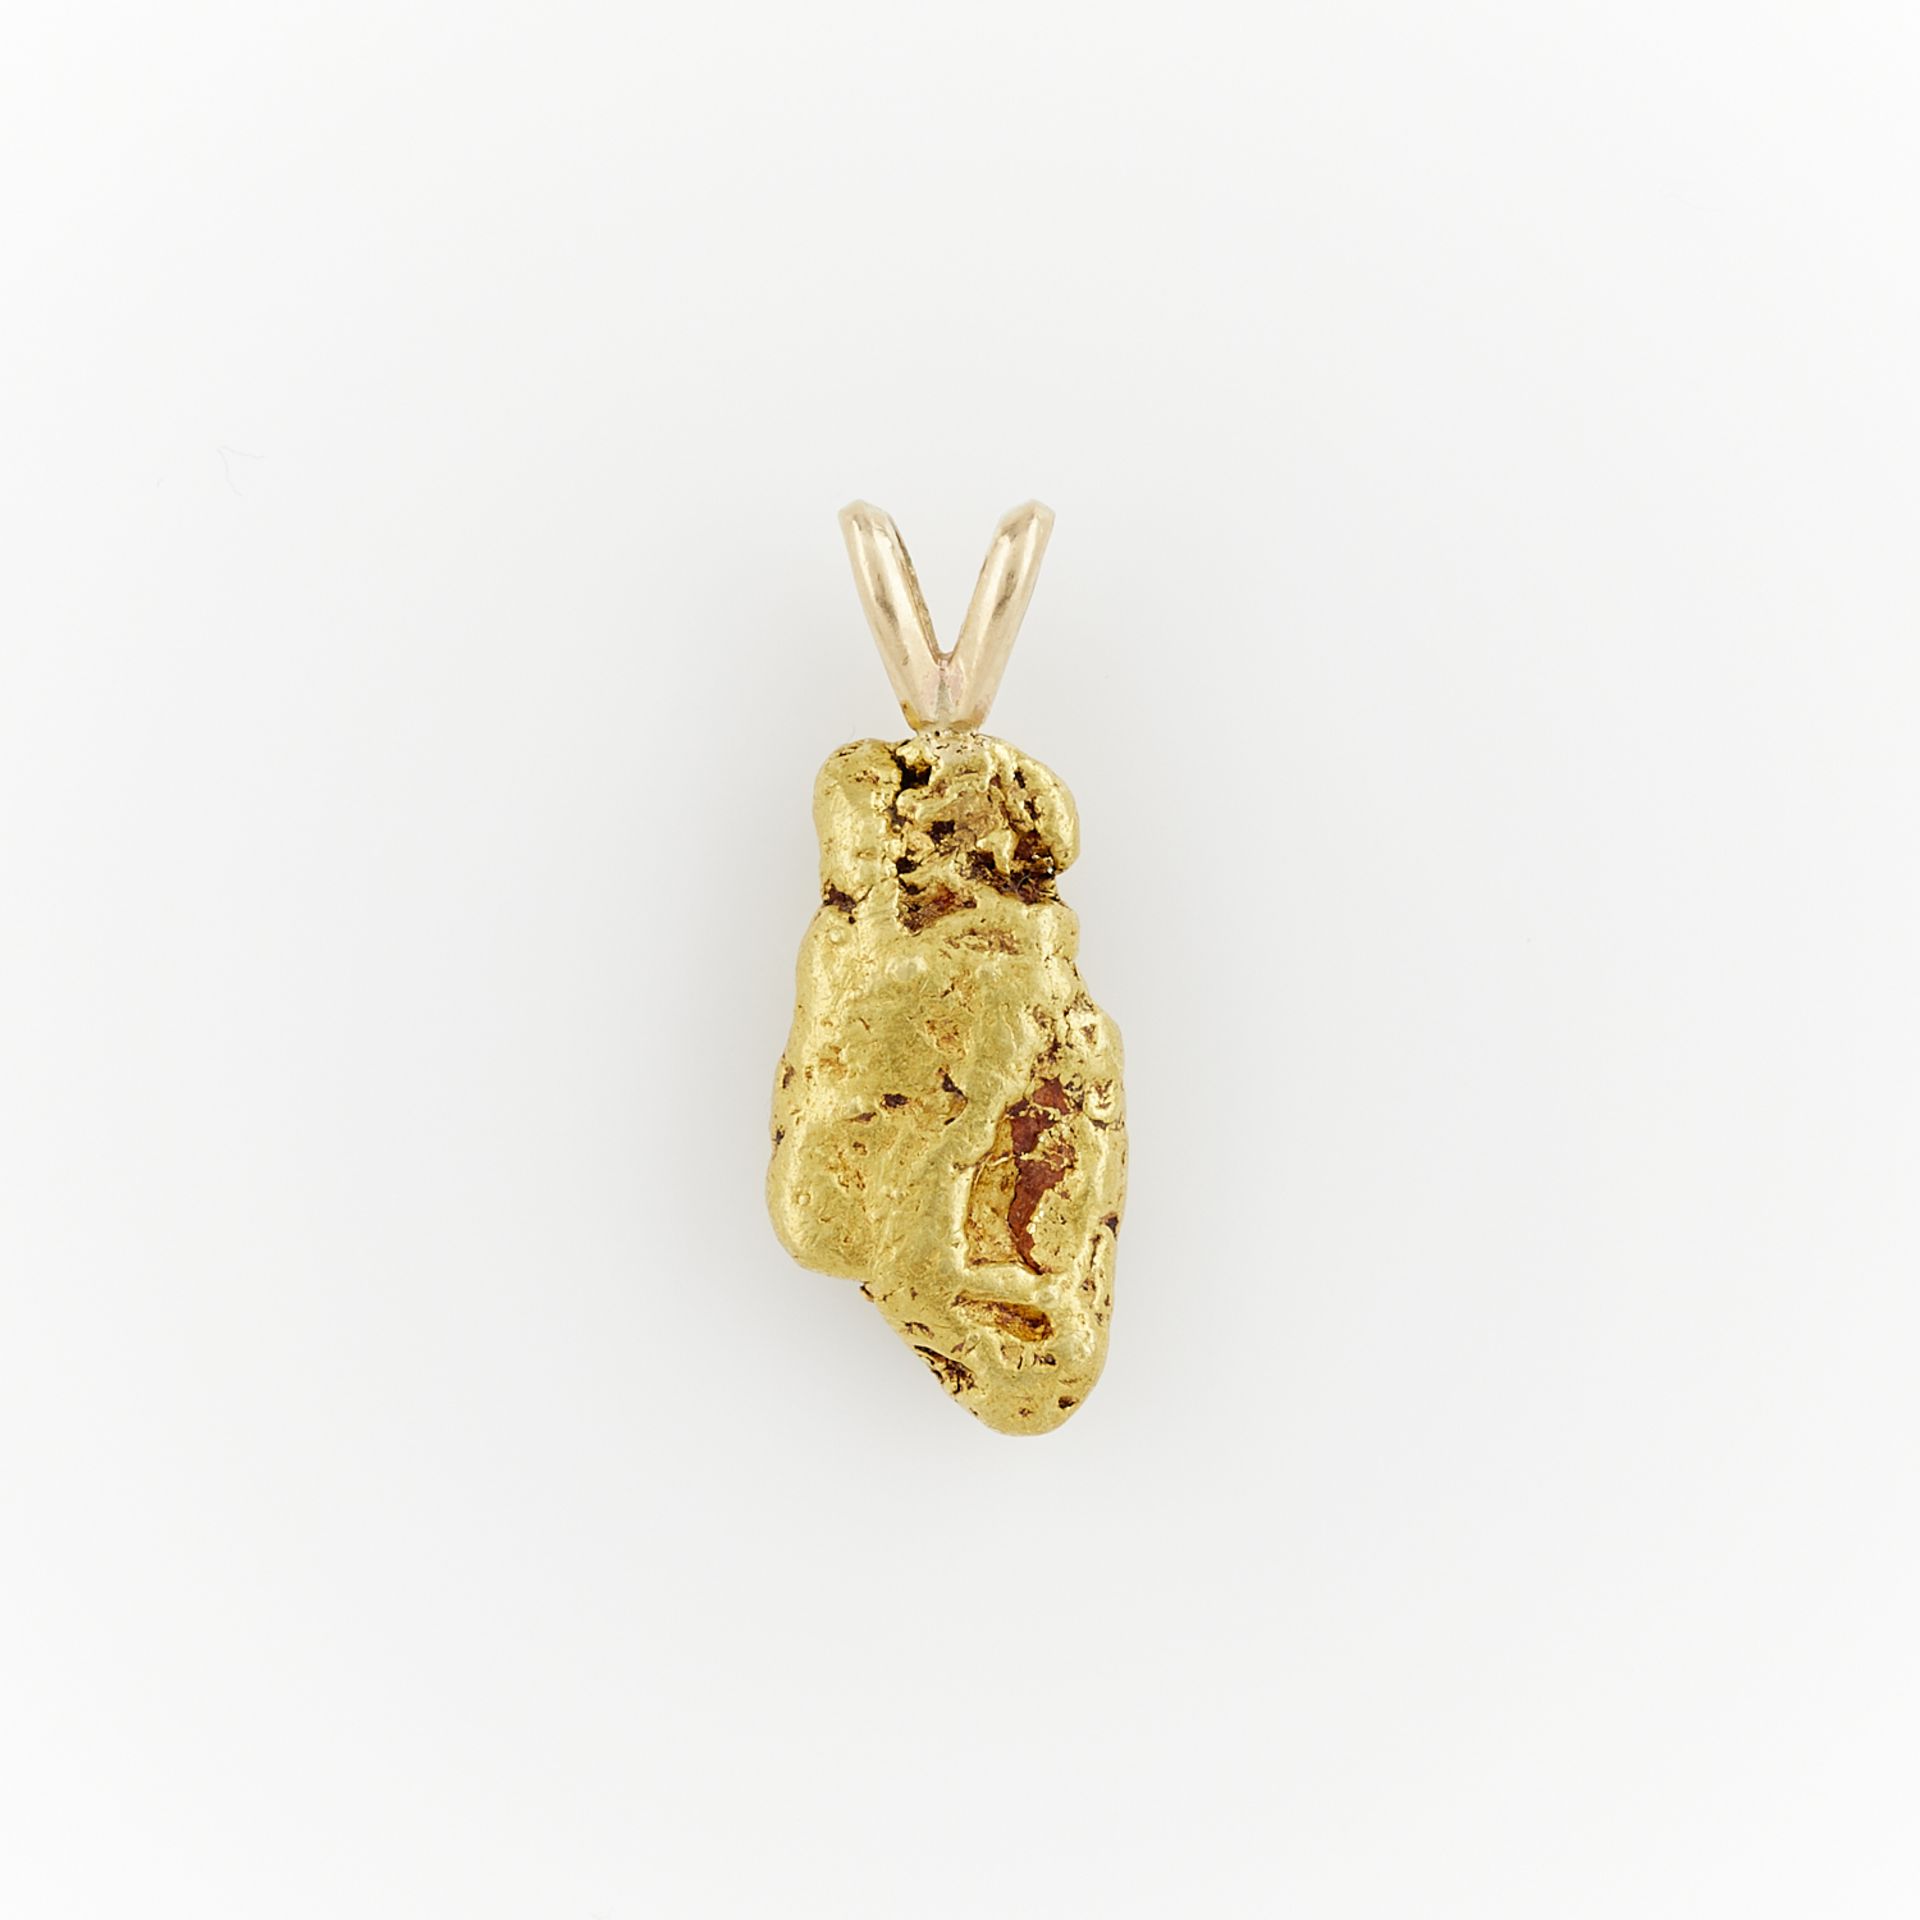 Gold Nugget Form Pendant - Image 3 of 5